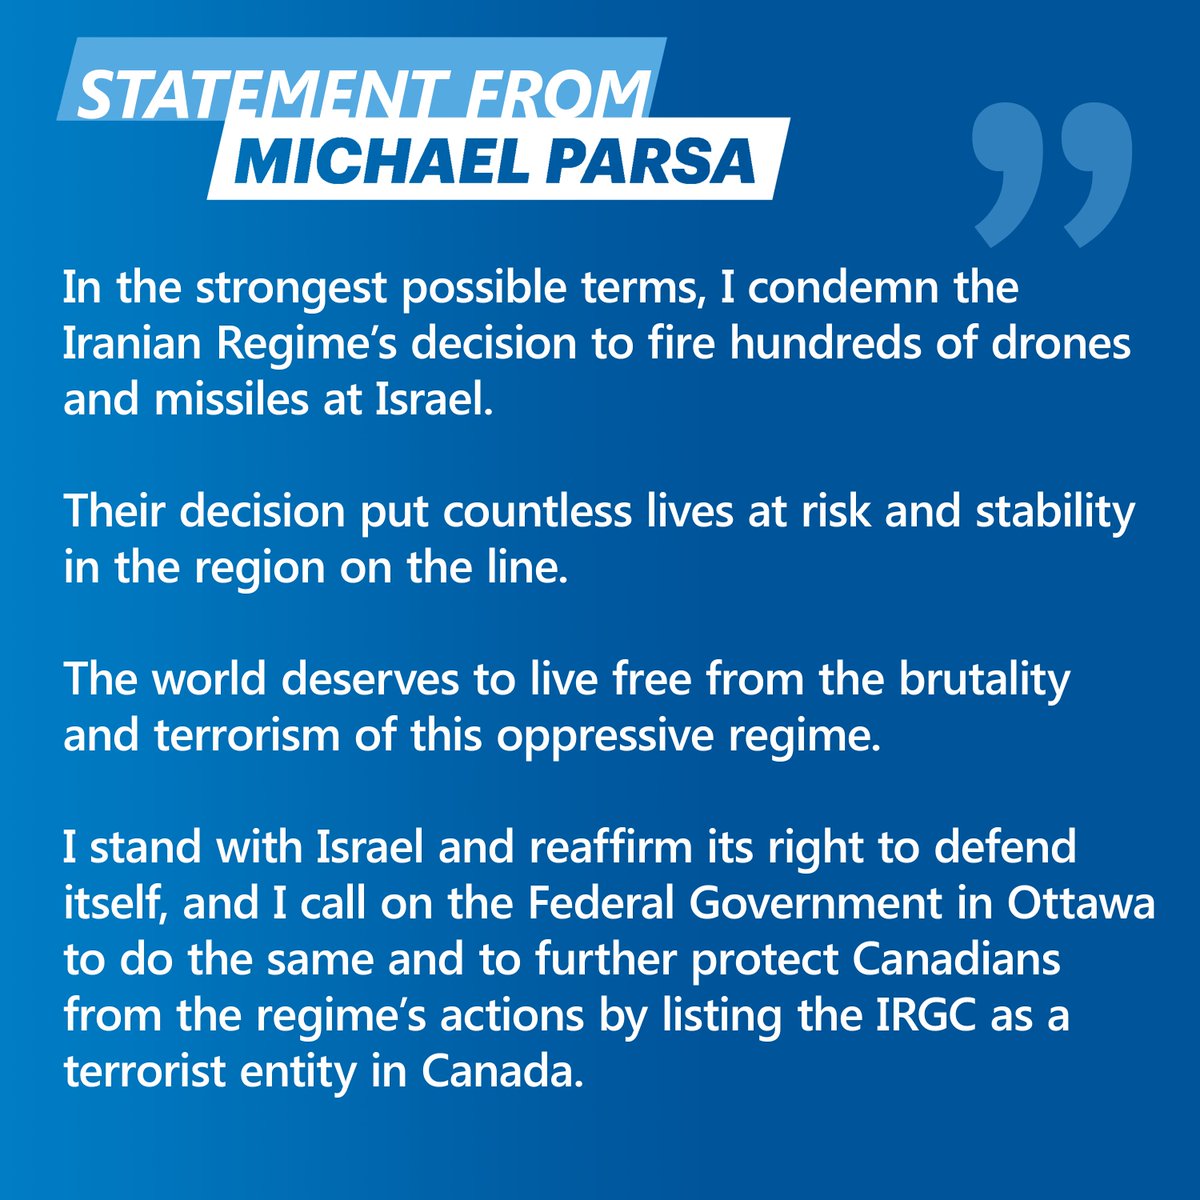 Statement from Michael Parsa.